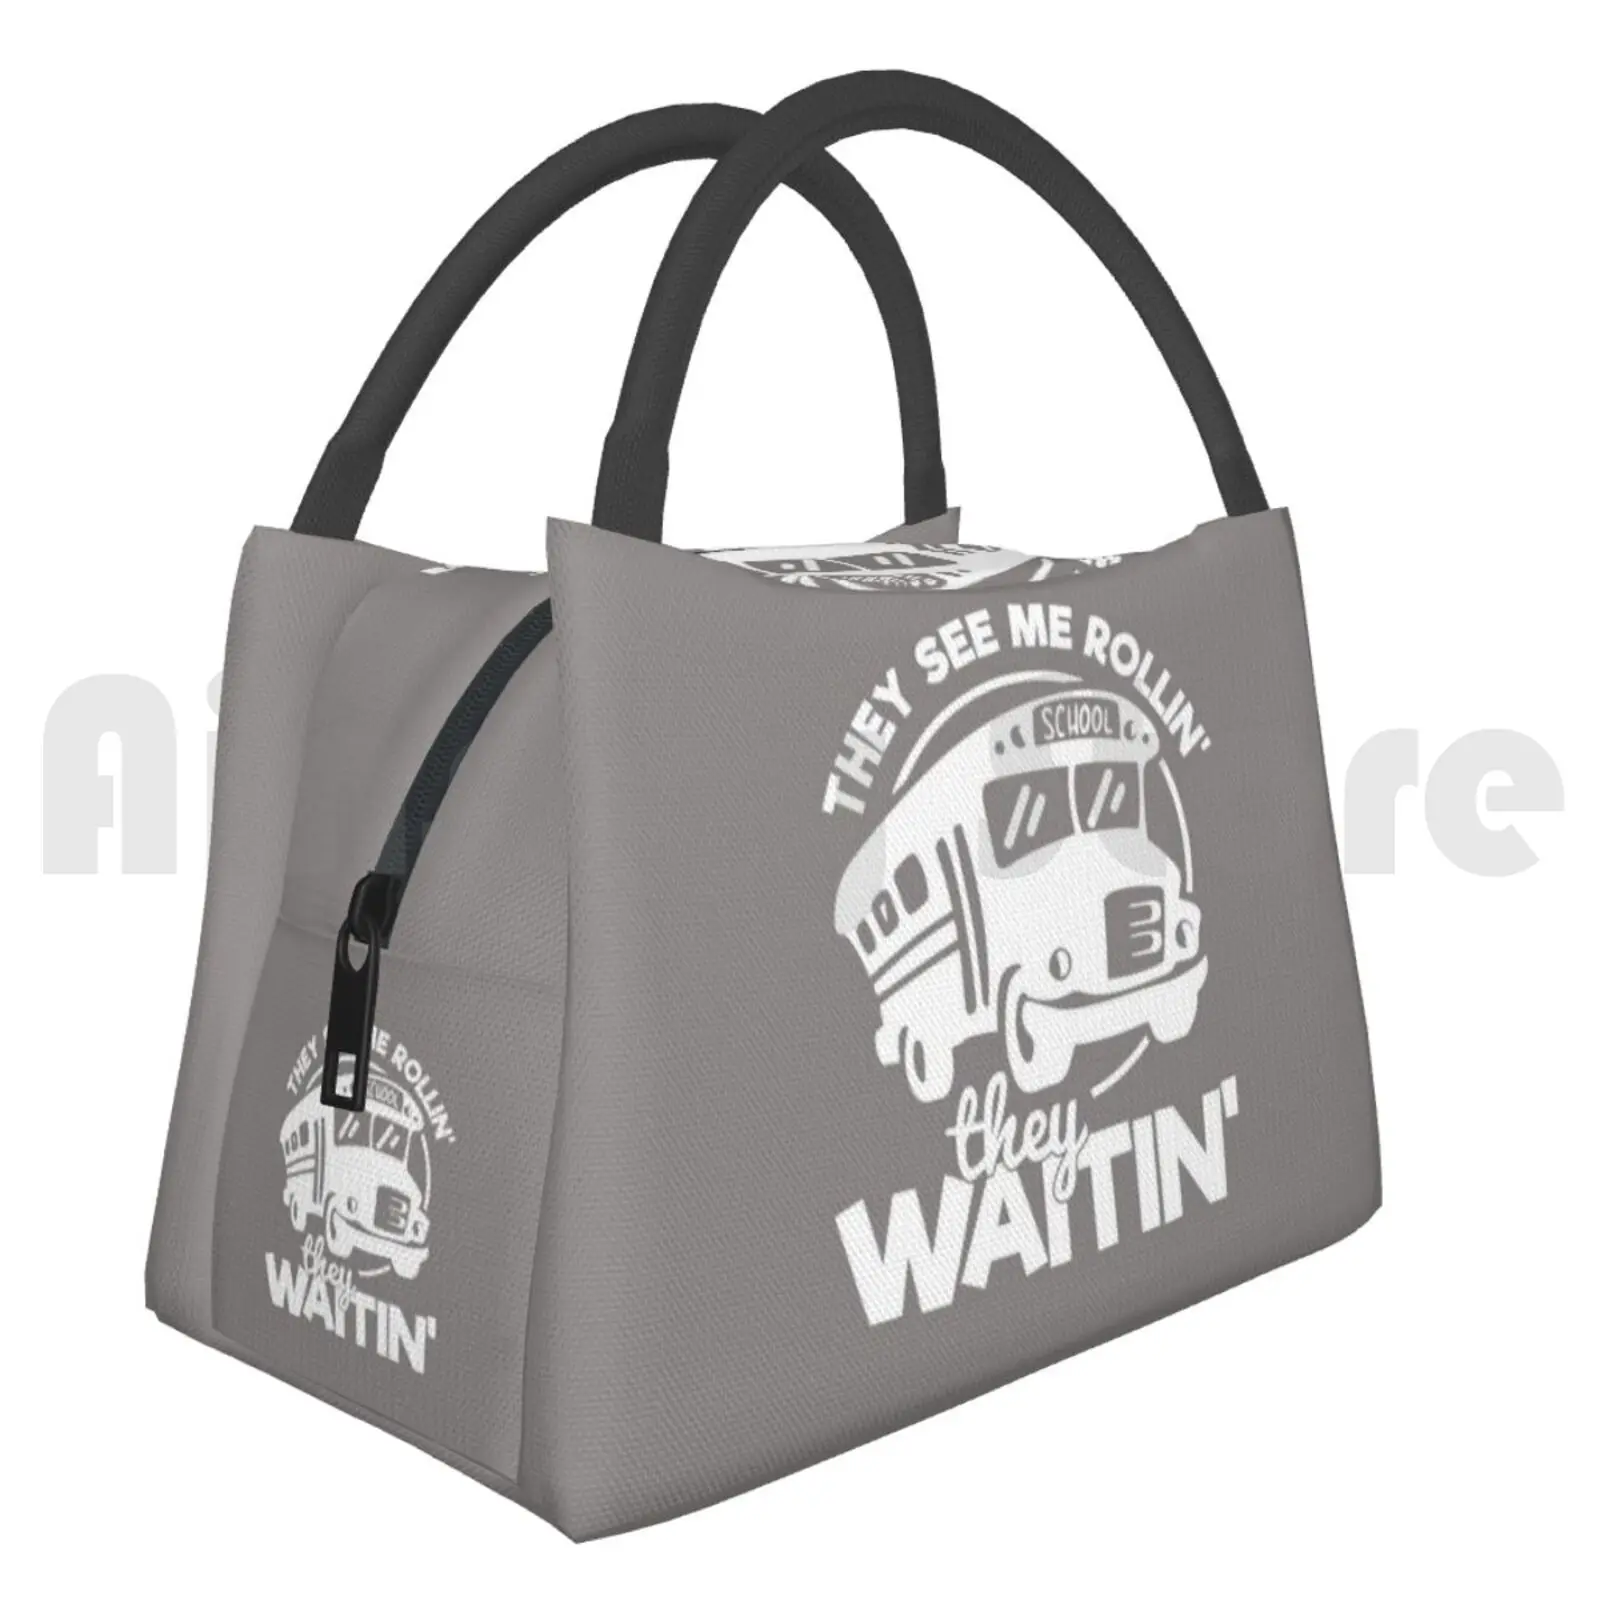 

Portable Insulation Bag School Bus Driver Gift They See Me Rollin' They Waitin' School Bus School Bus